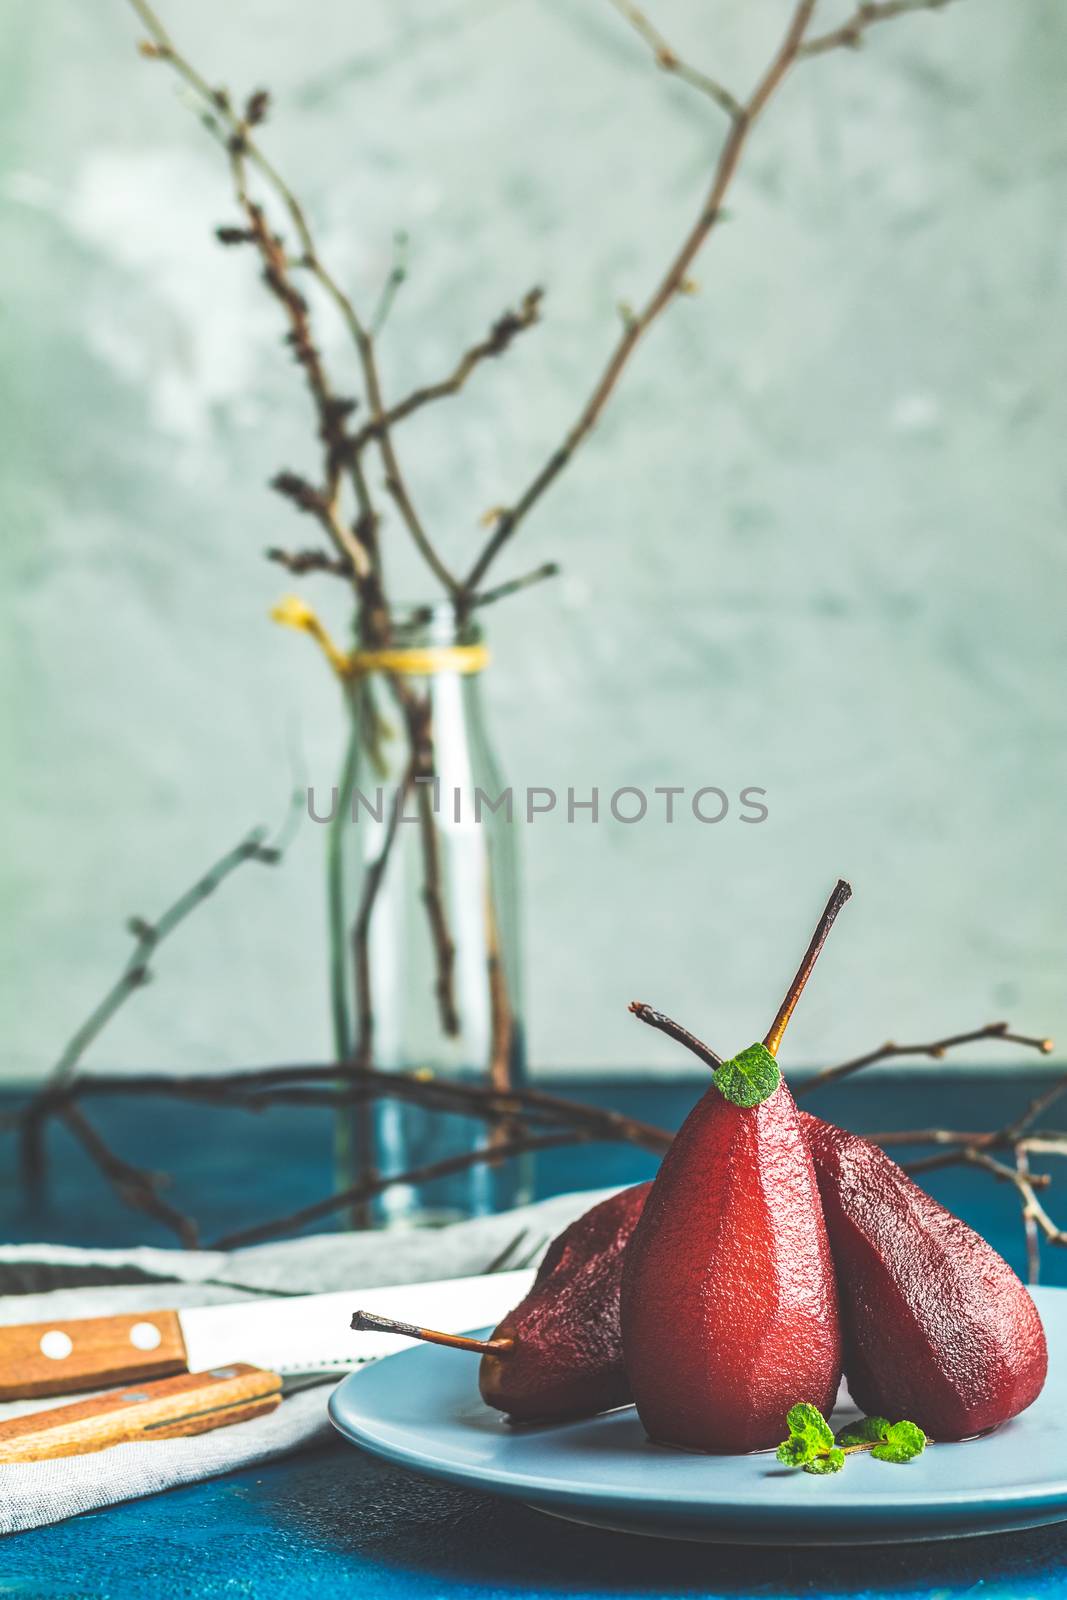 Traditional dessert pears stewed in red wine with chocolate sauce on plate on blue concrete surface. Concept for romantic dinner dessert. Simple Paleo style dessert pear poached in pomegranate juice